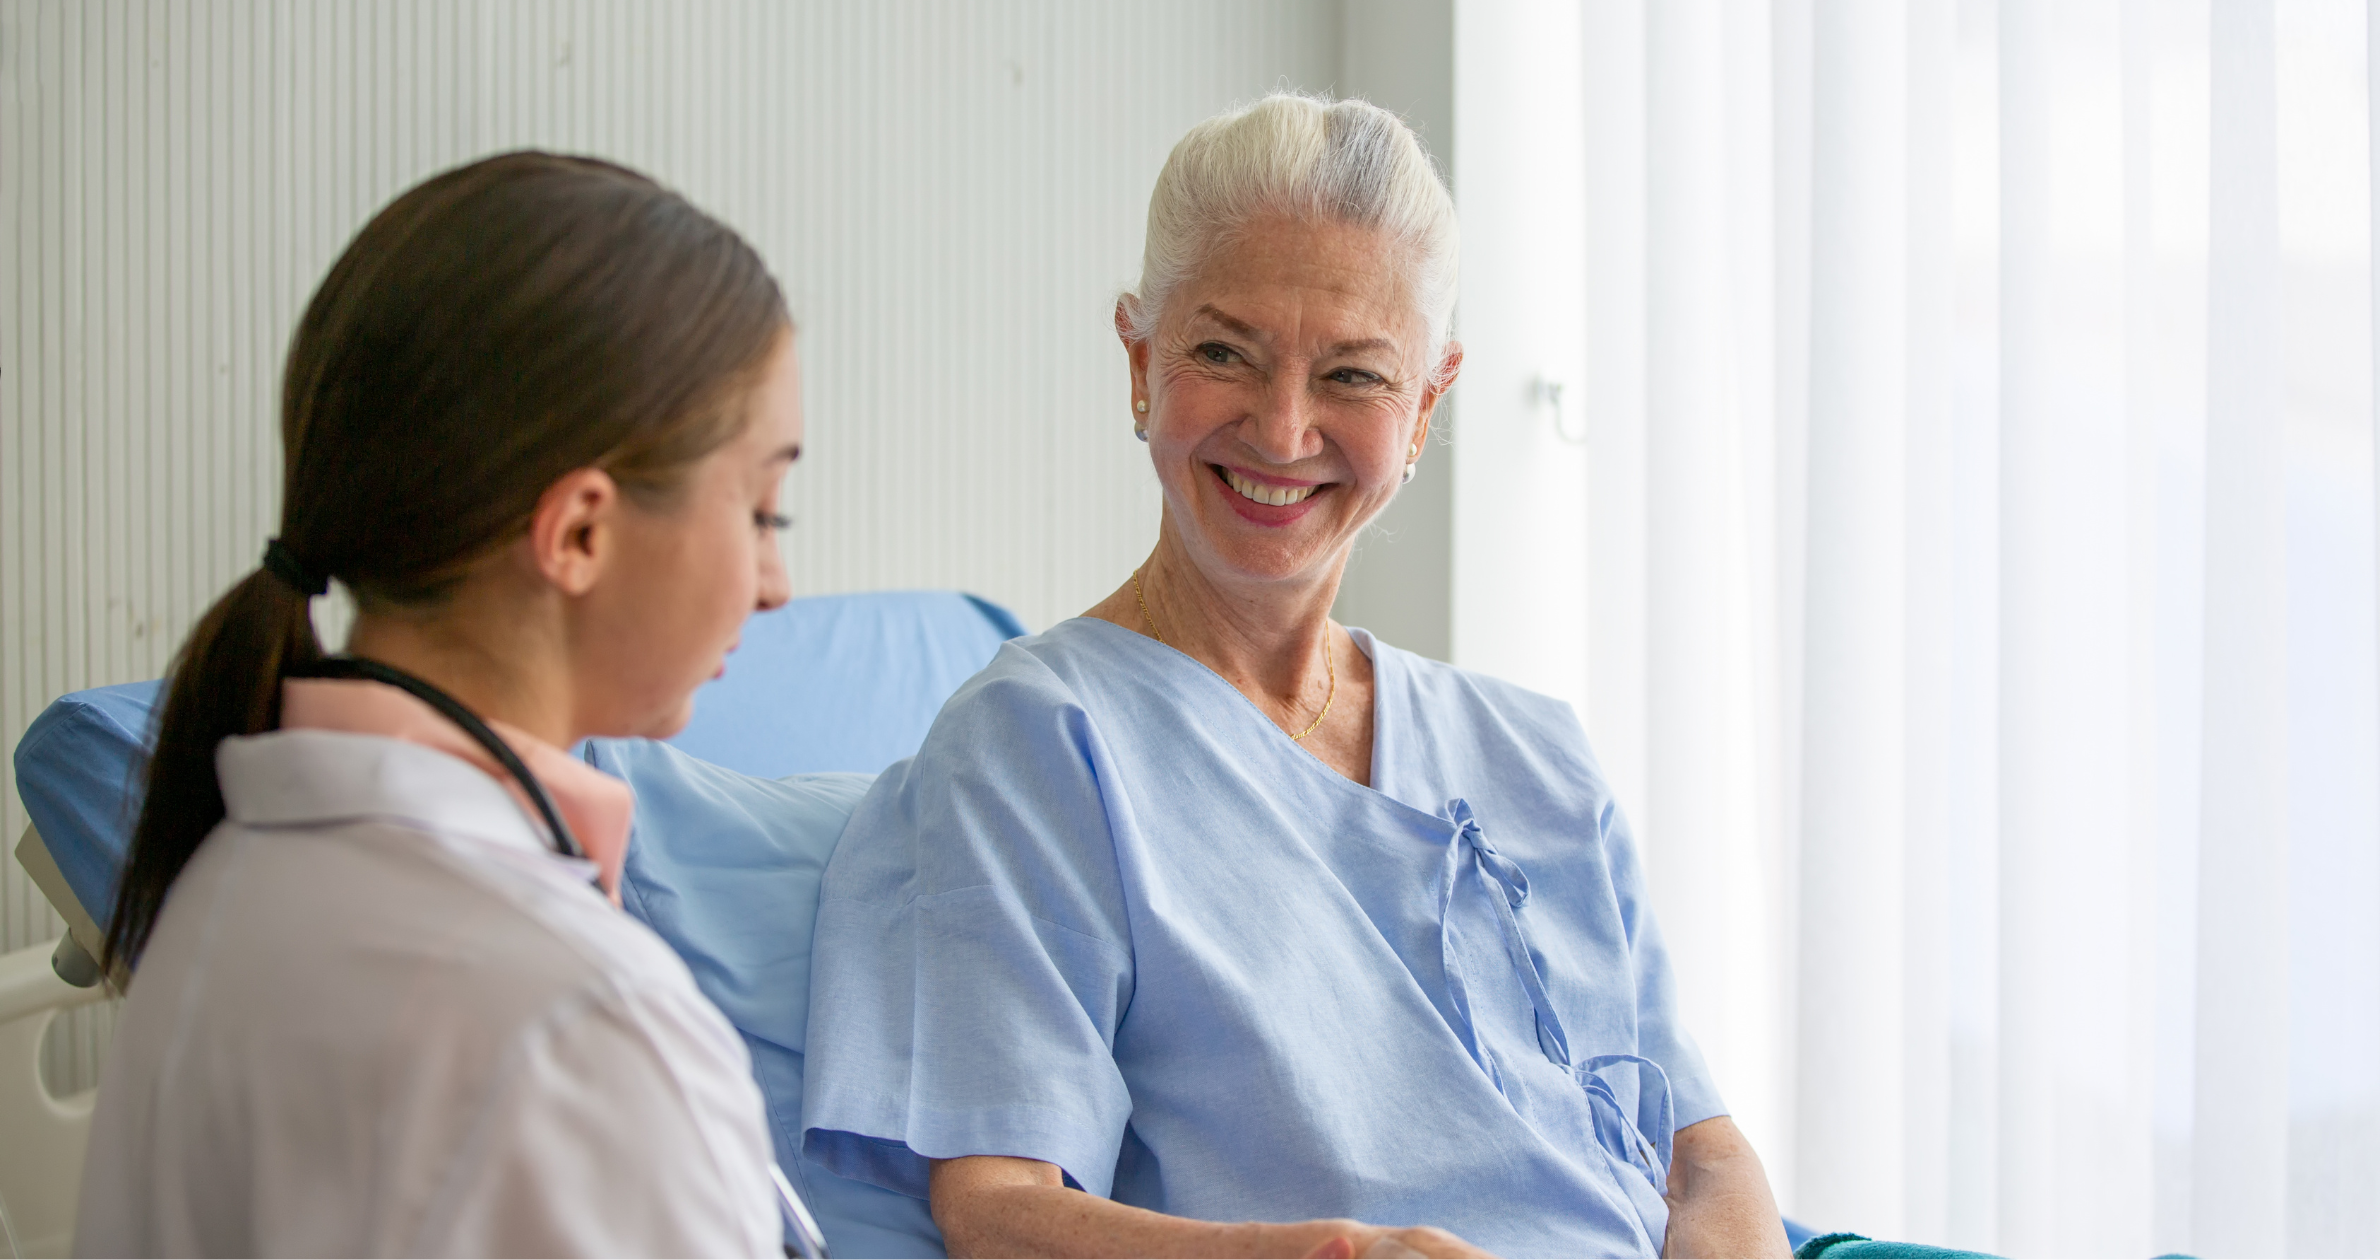 Improving Patient Comfort in the Healthcare Setting